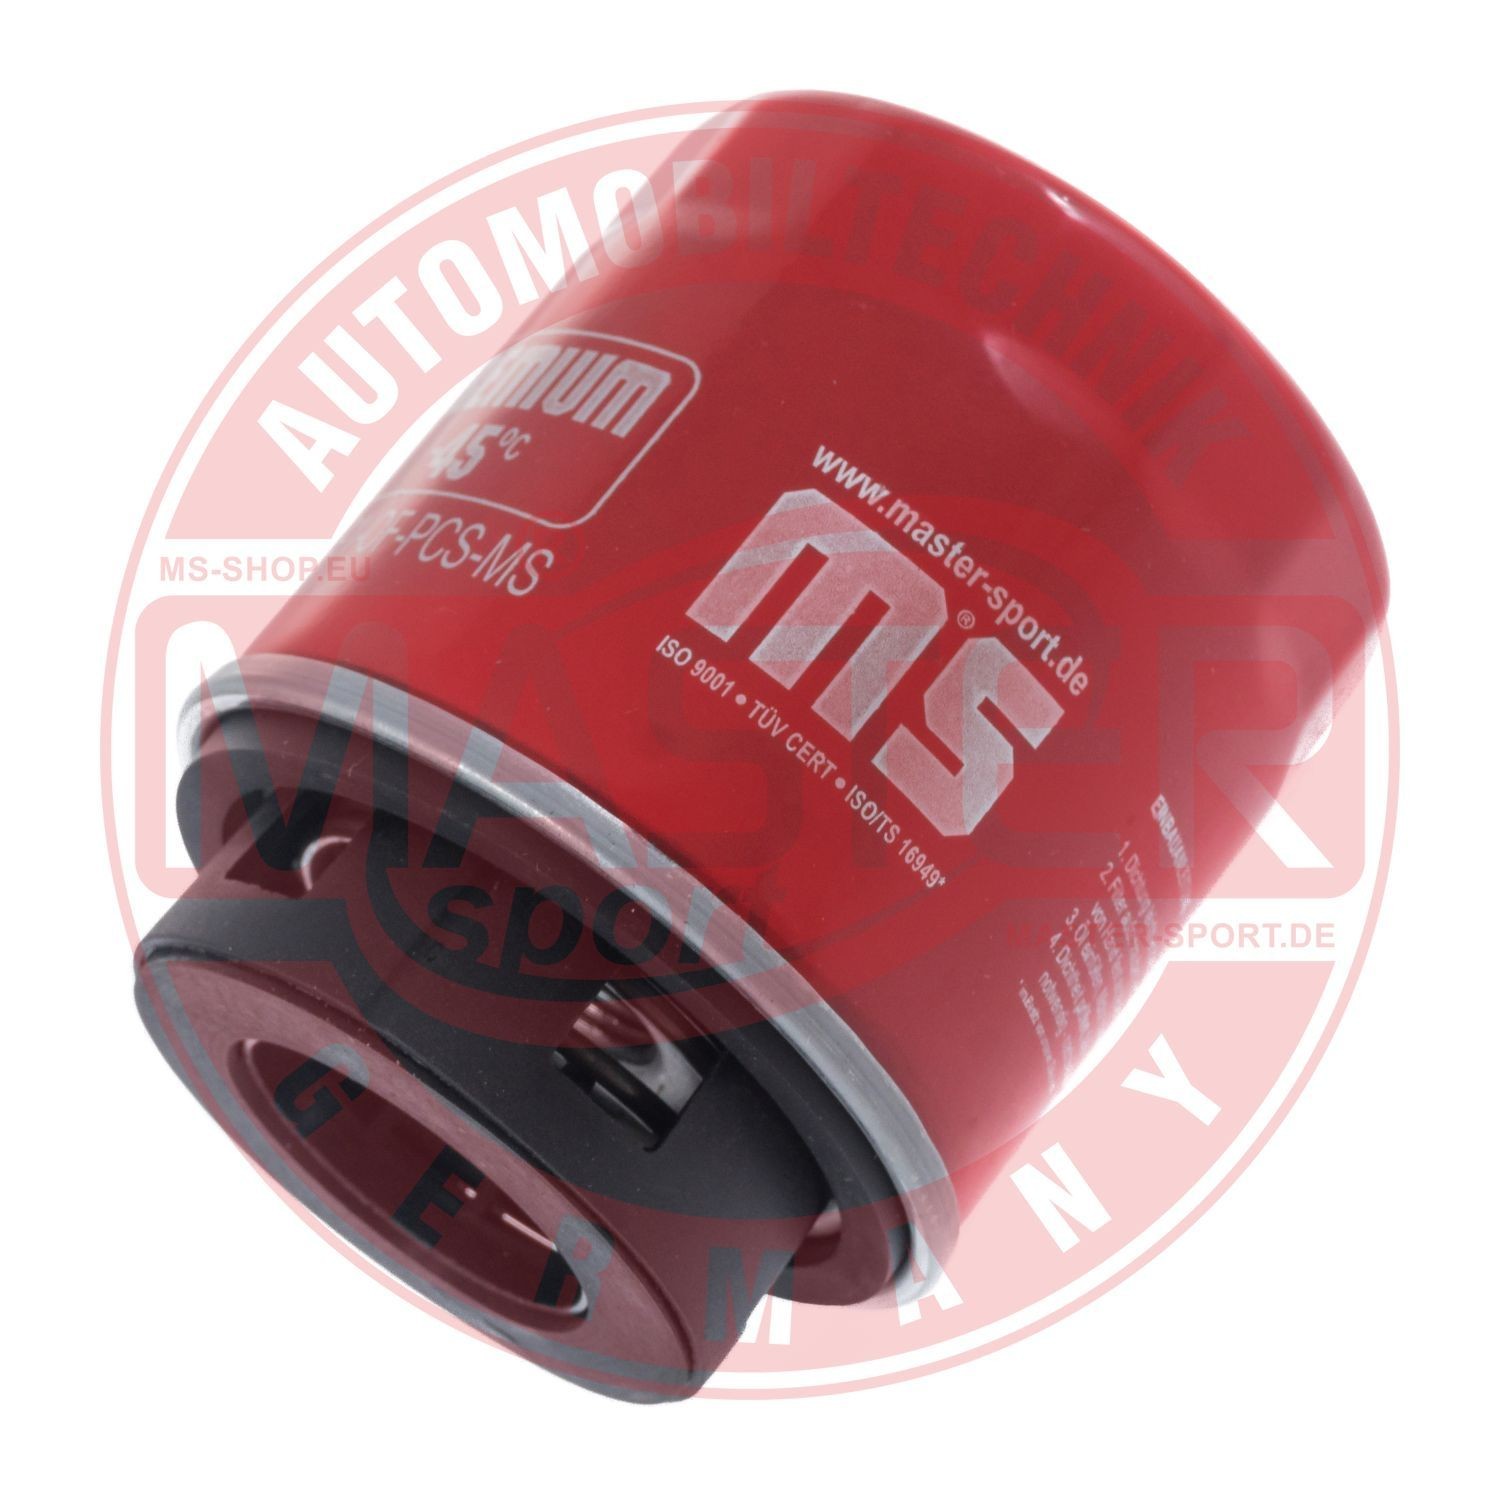 MASTER-SPORT 712/91-OF-PCS-MS Oil filter SEAT experience and price